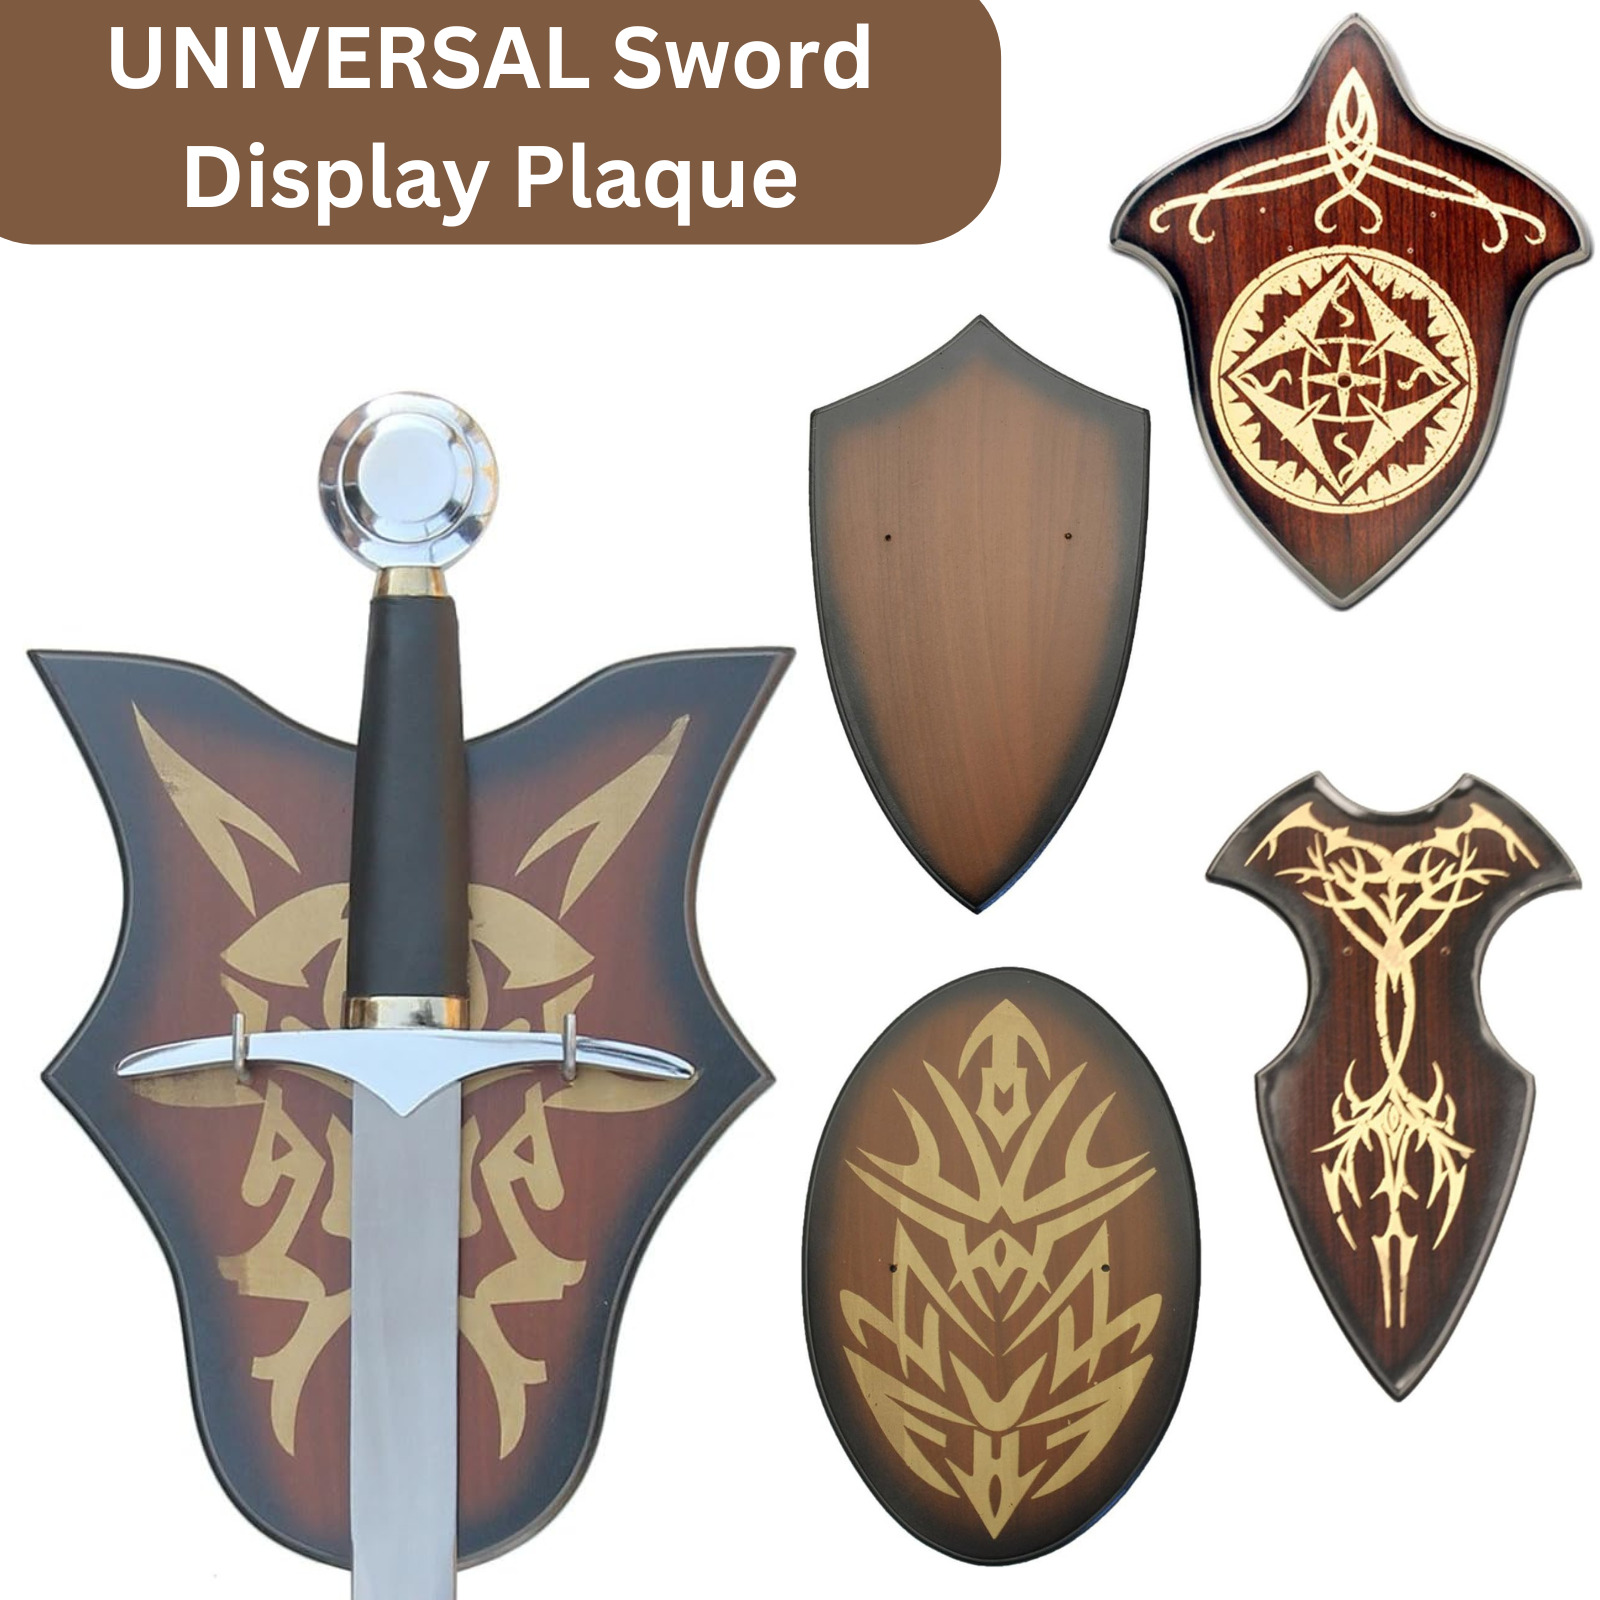 UNIVERSAL WALL DAGGER SWORD MEDIEVAL PAINTED DISPLAY PLAQUE W/ HARDWARE INCLUDED